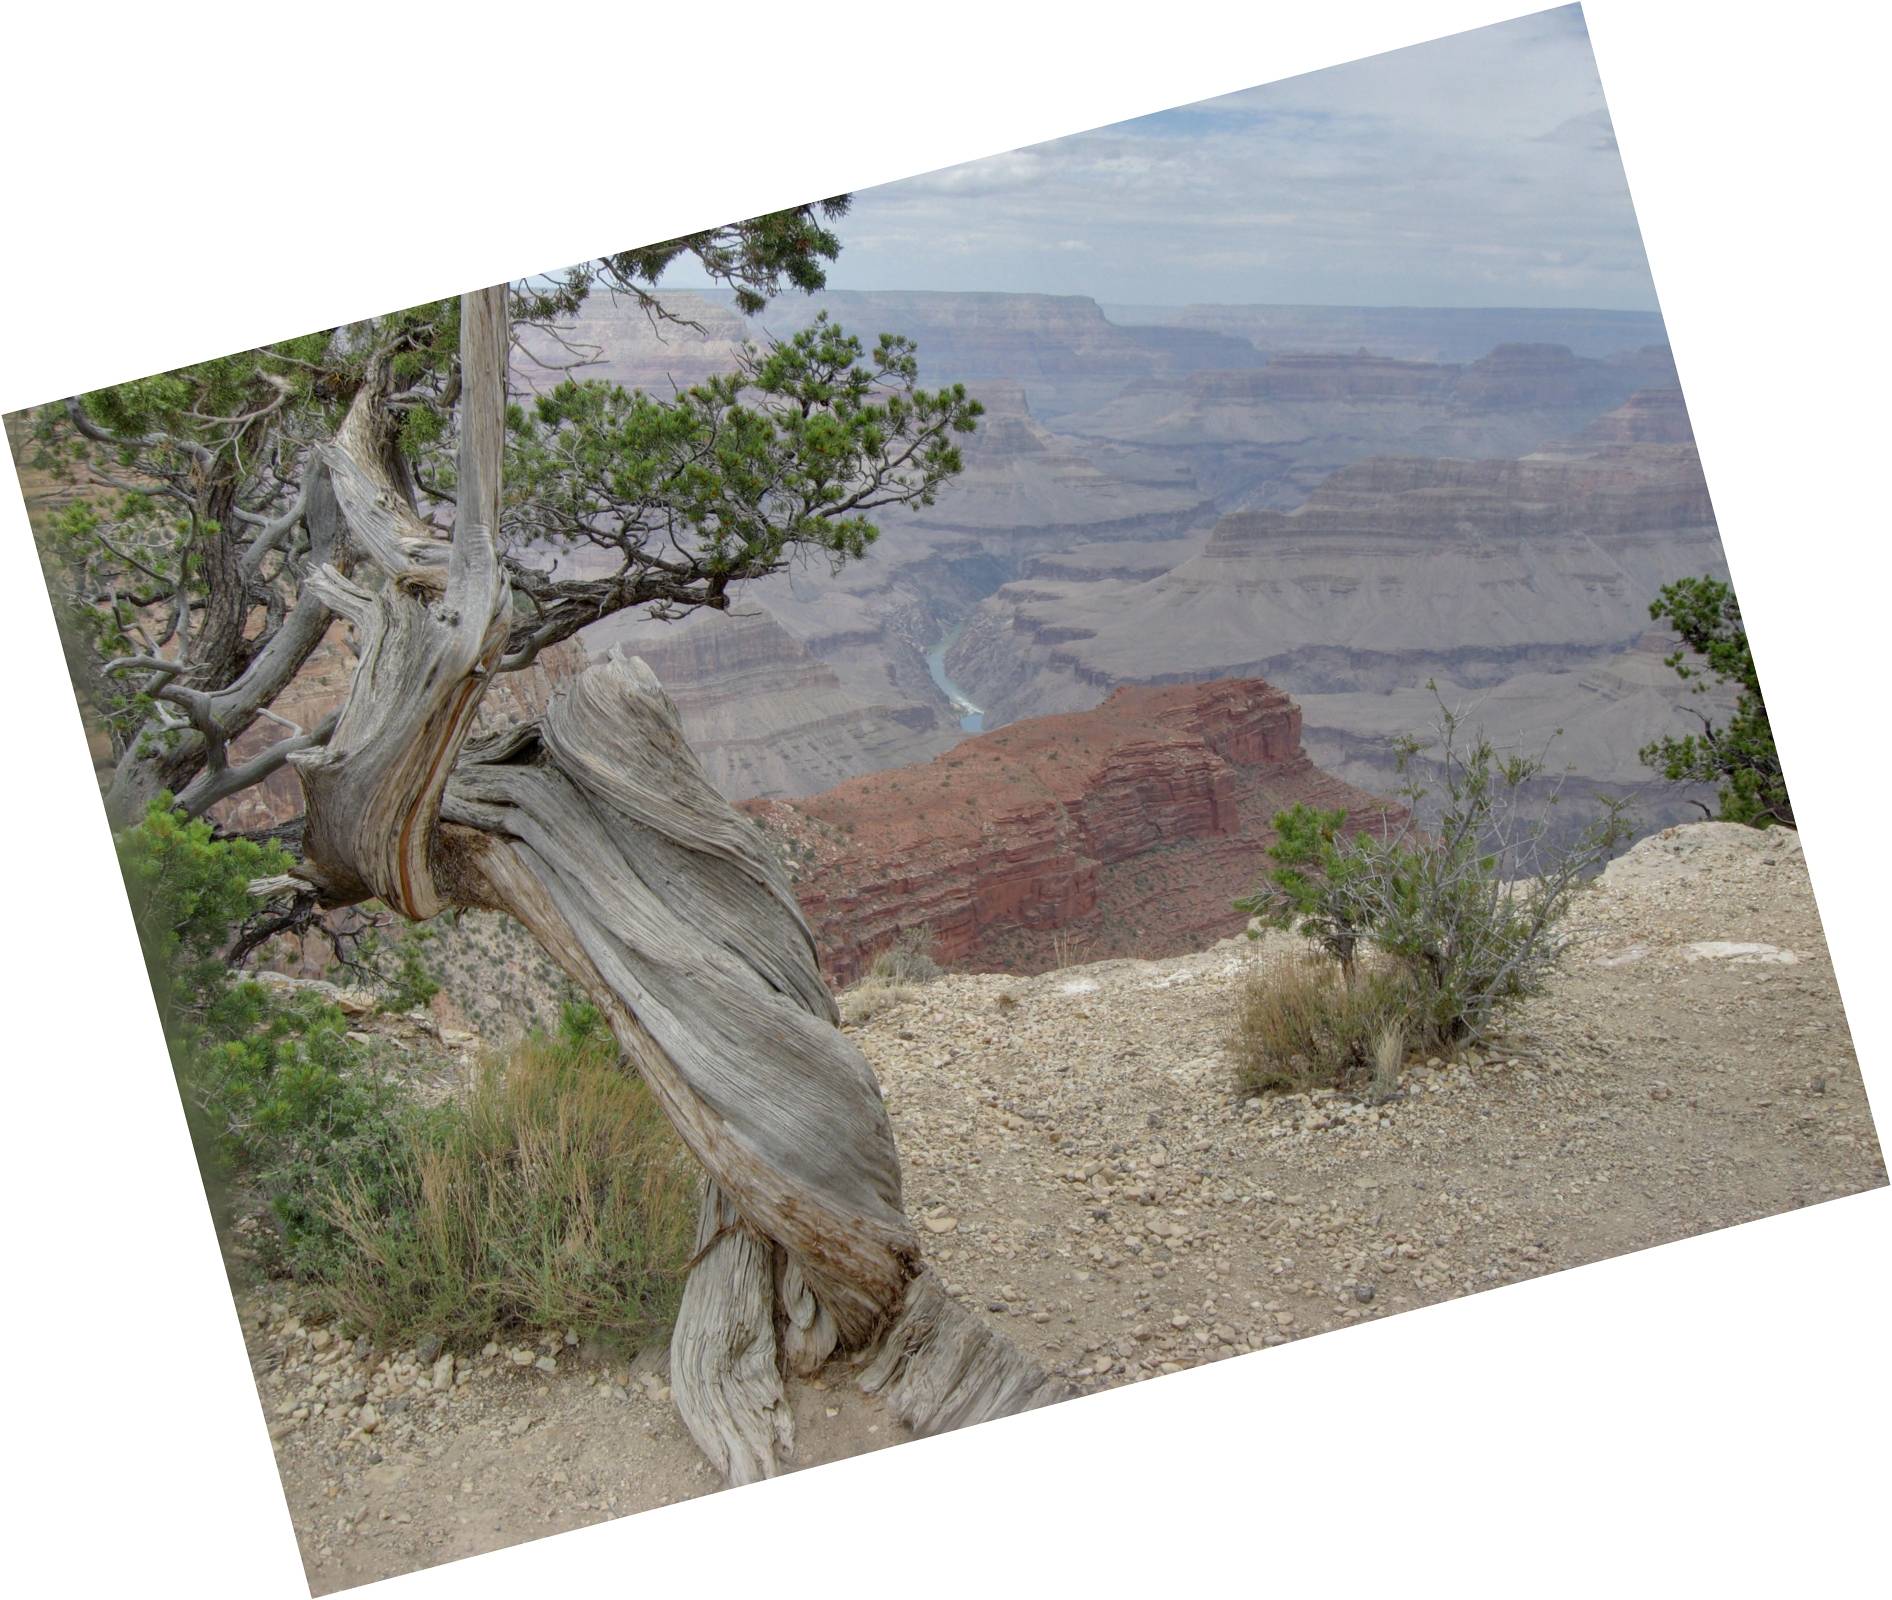 Image: The Grand Canyon as seen from the southern rim